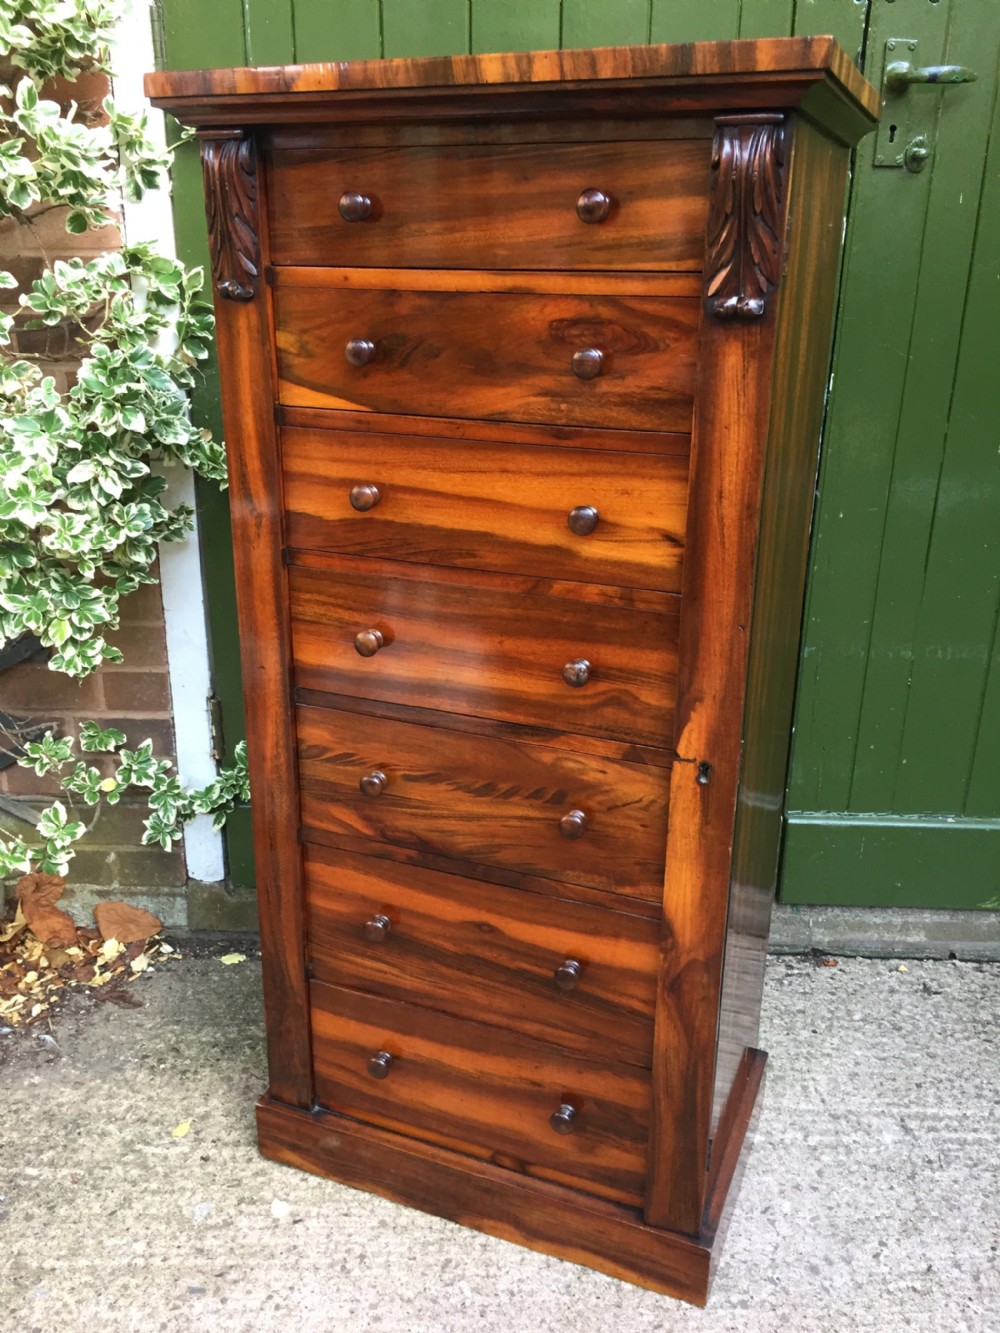 fine quality early c19th george iv period wellington chest of drawers in rare gonalo alves timber